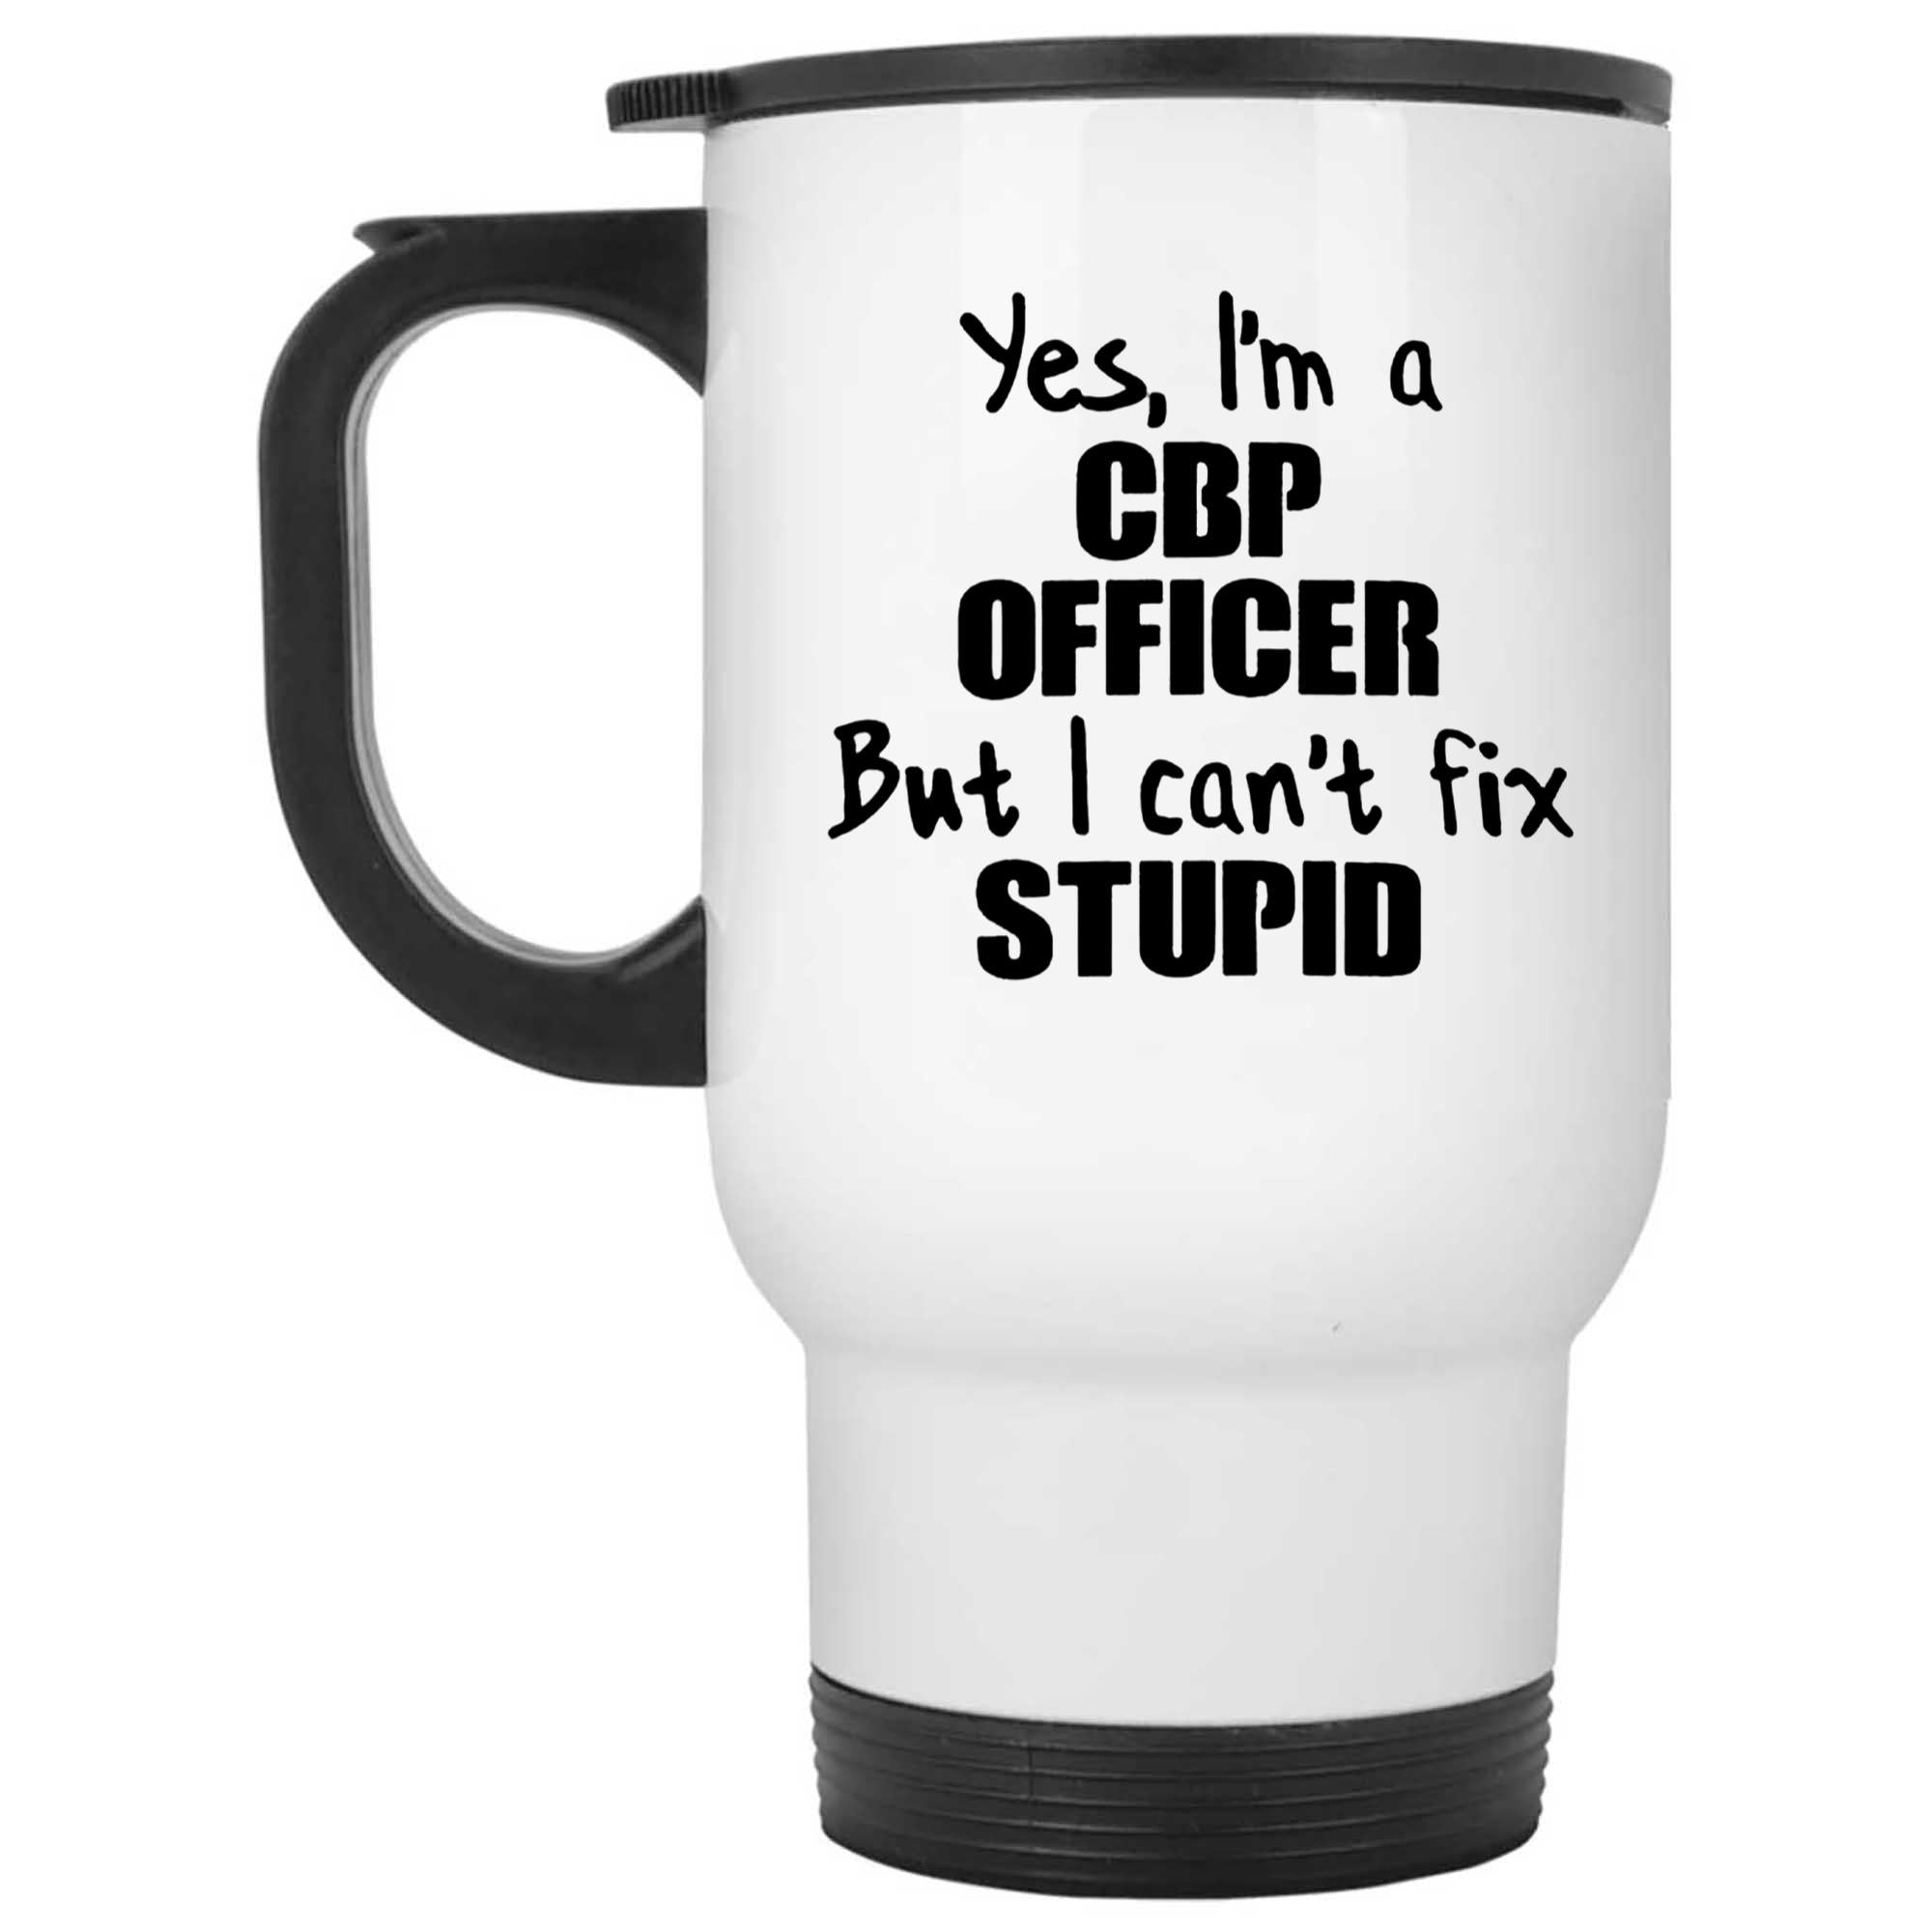 Skitongifts Funny Ceramic Novelty Coffee Mug Yes. I'm A Cbp Officer But I Can't Fix Stupid mUx1ig8